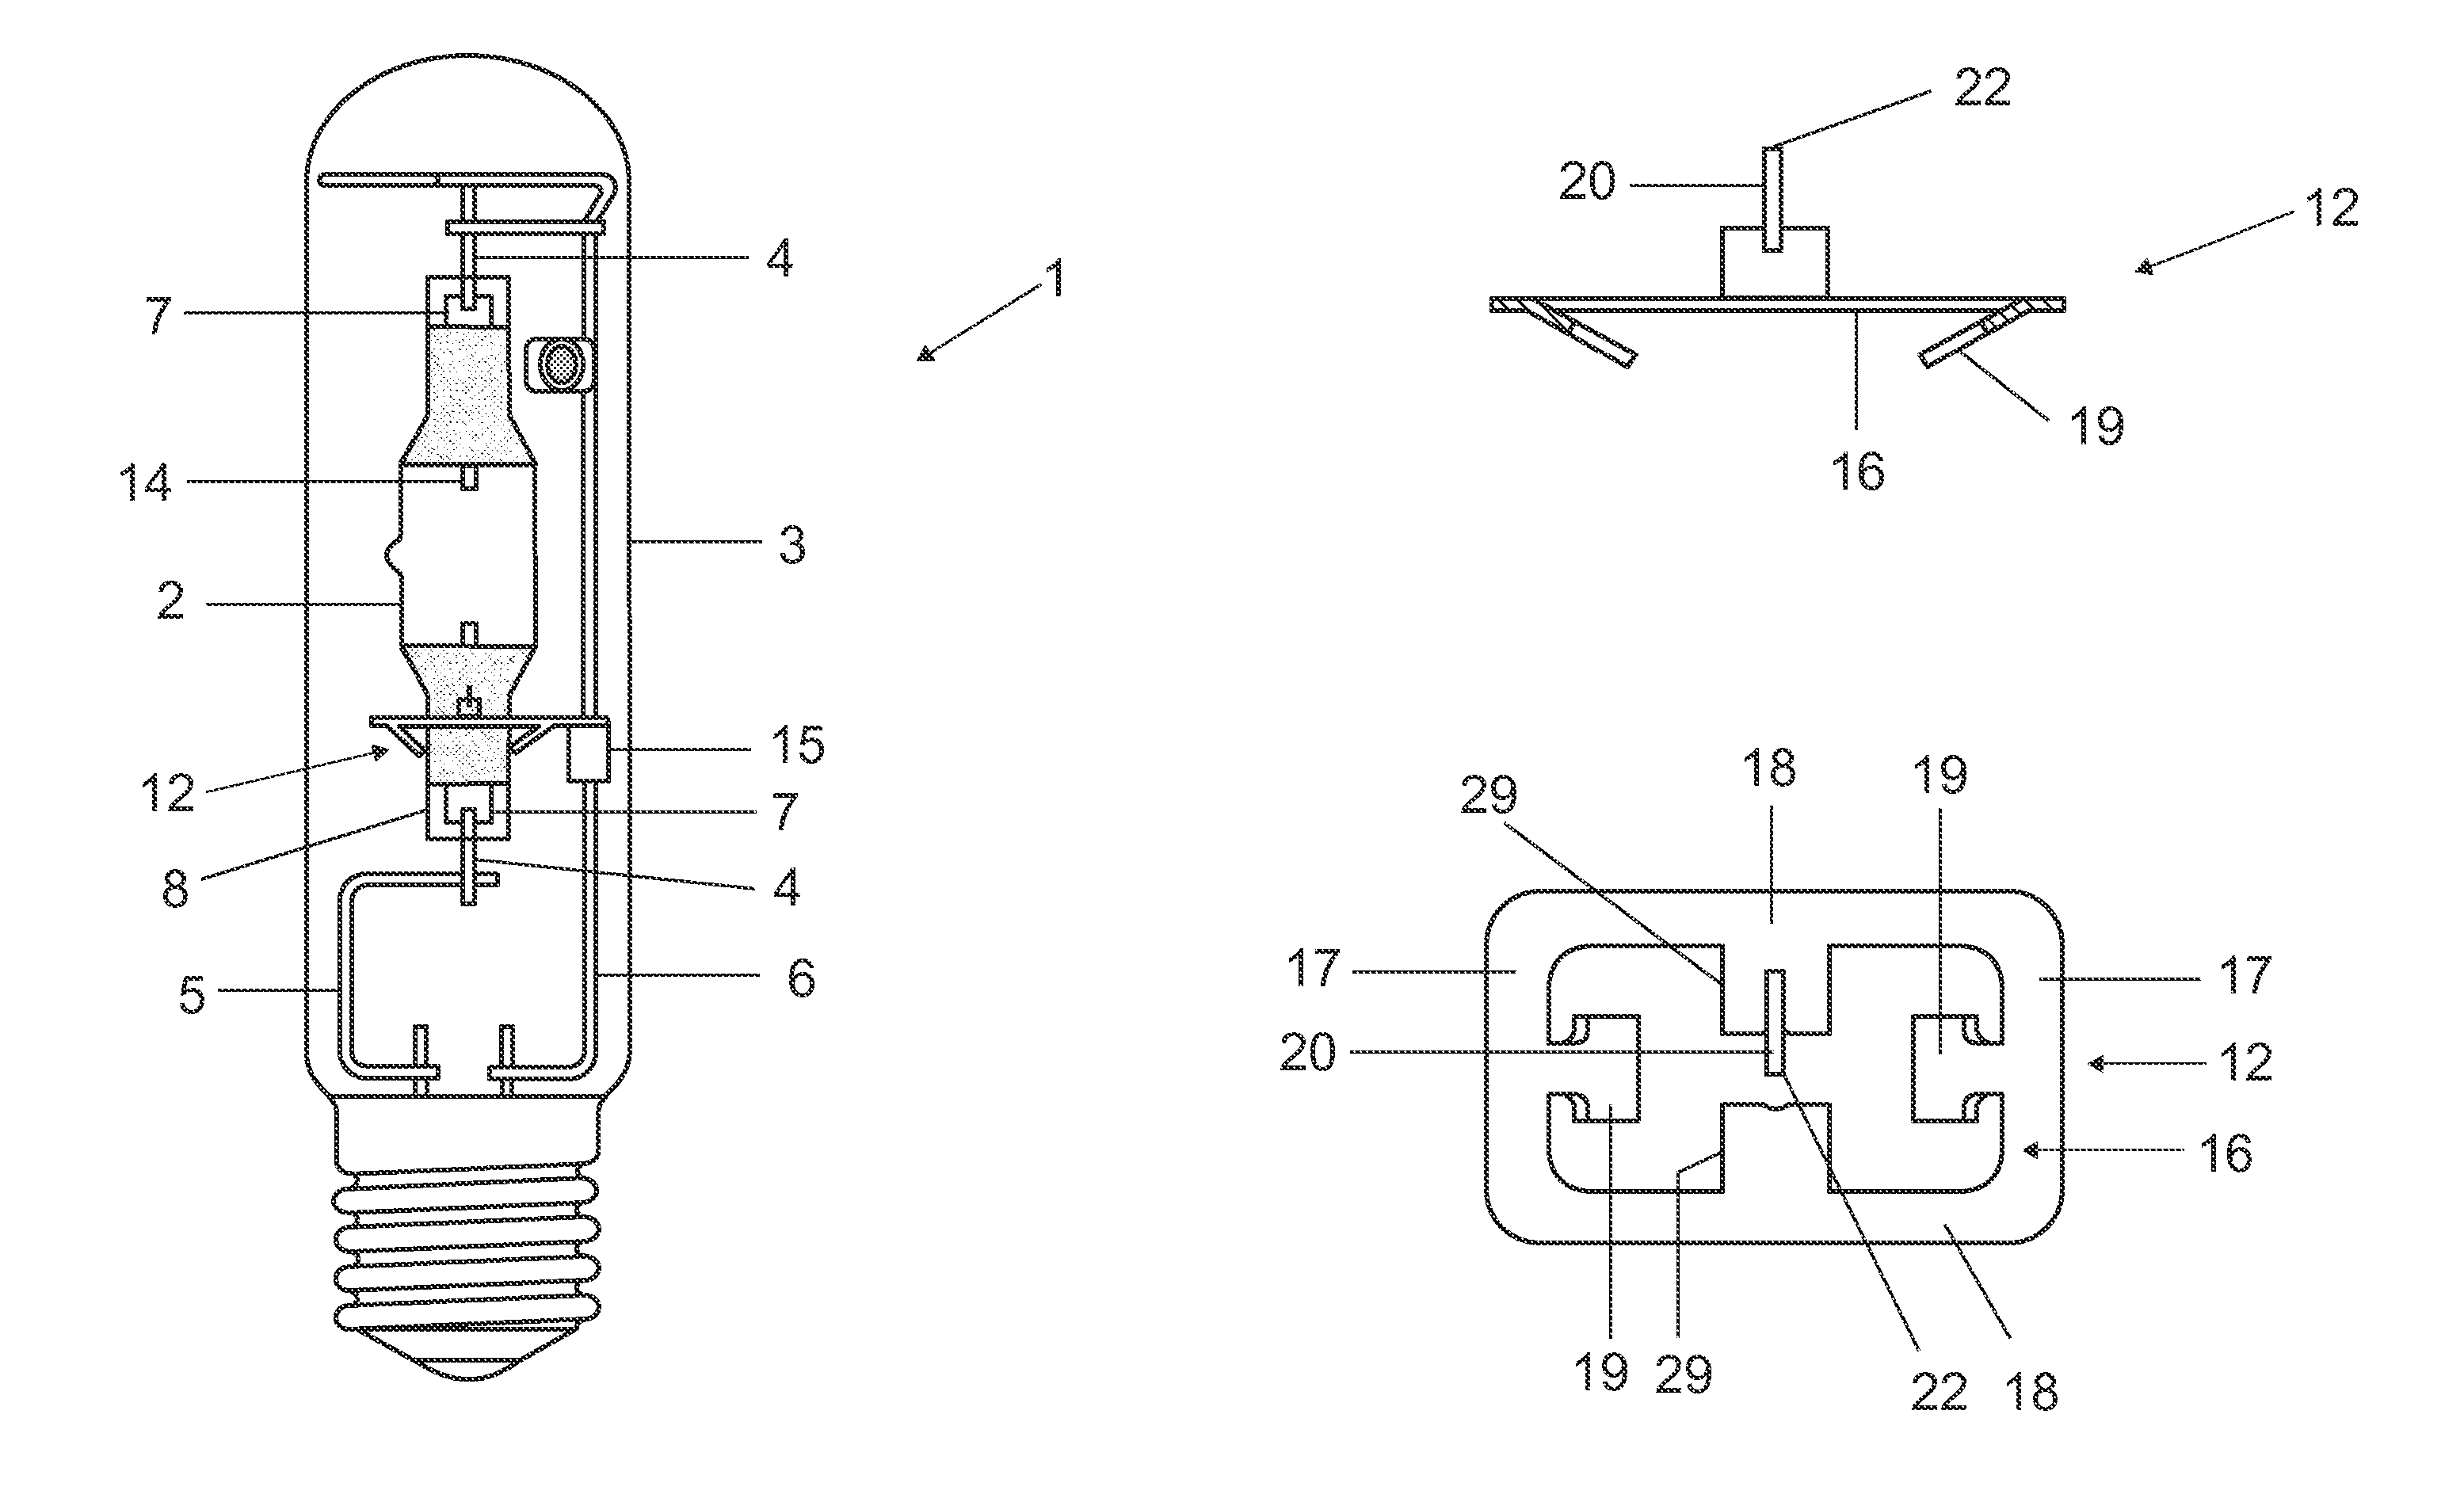 High-pressure discharge lamp having a capacitive ignition aid